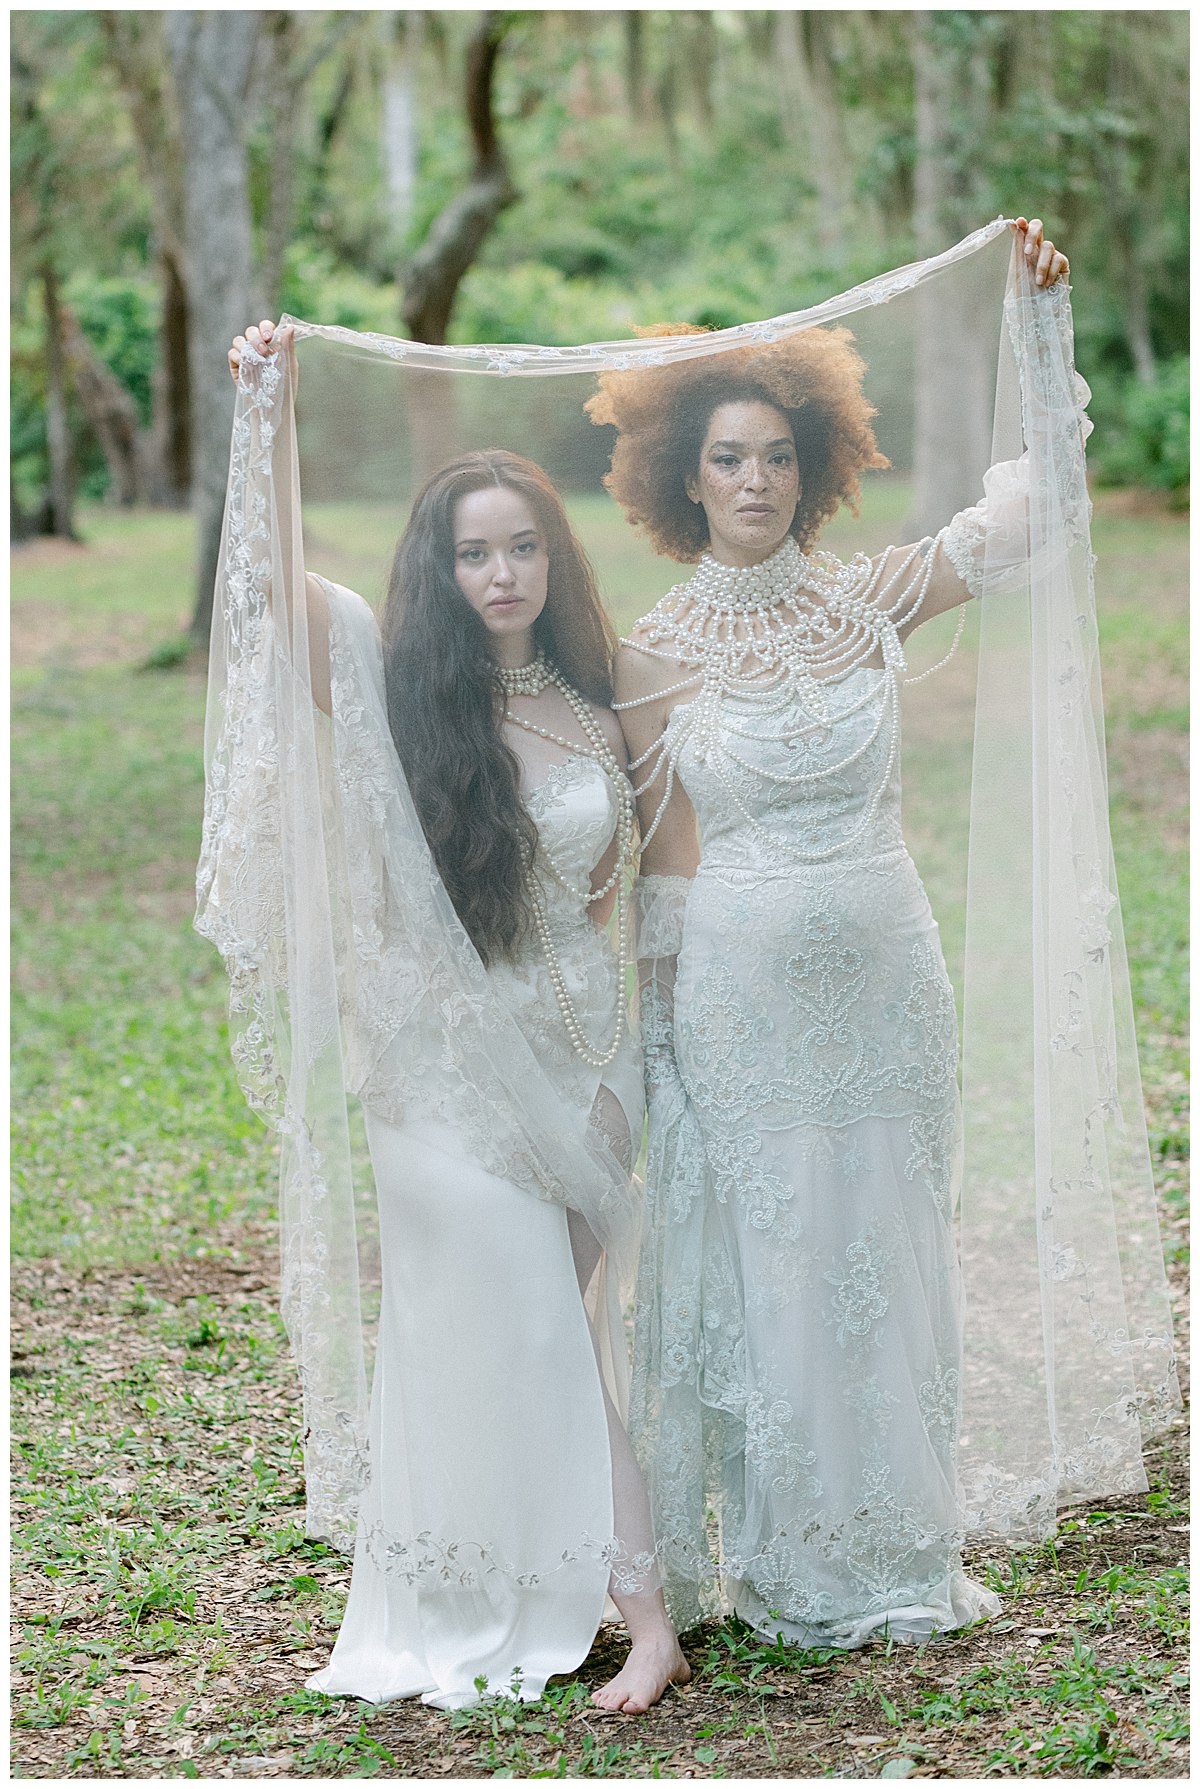 Two women models in white lace gowns looking through a lace veil